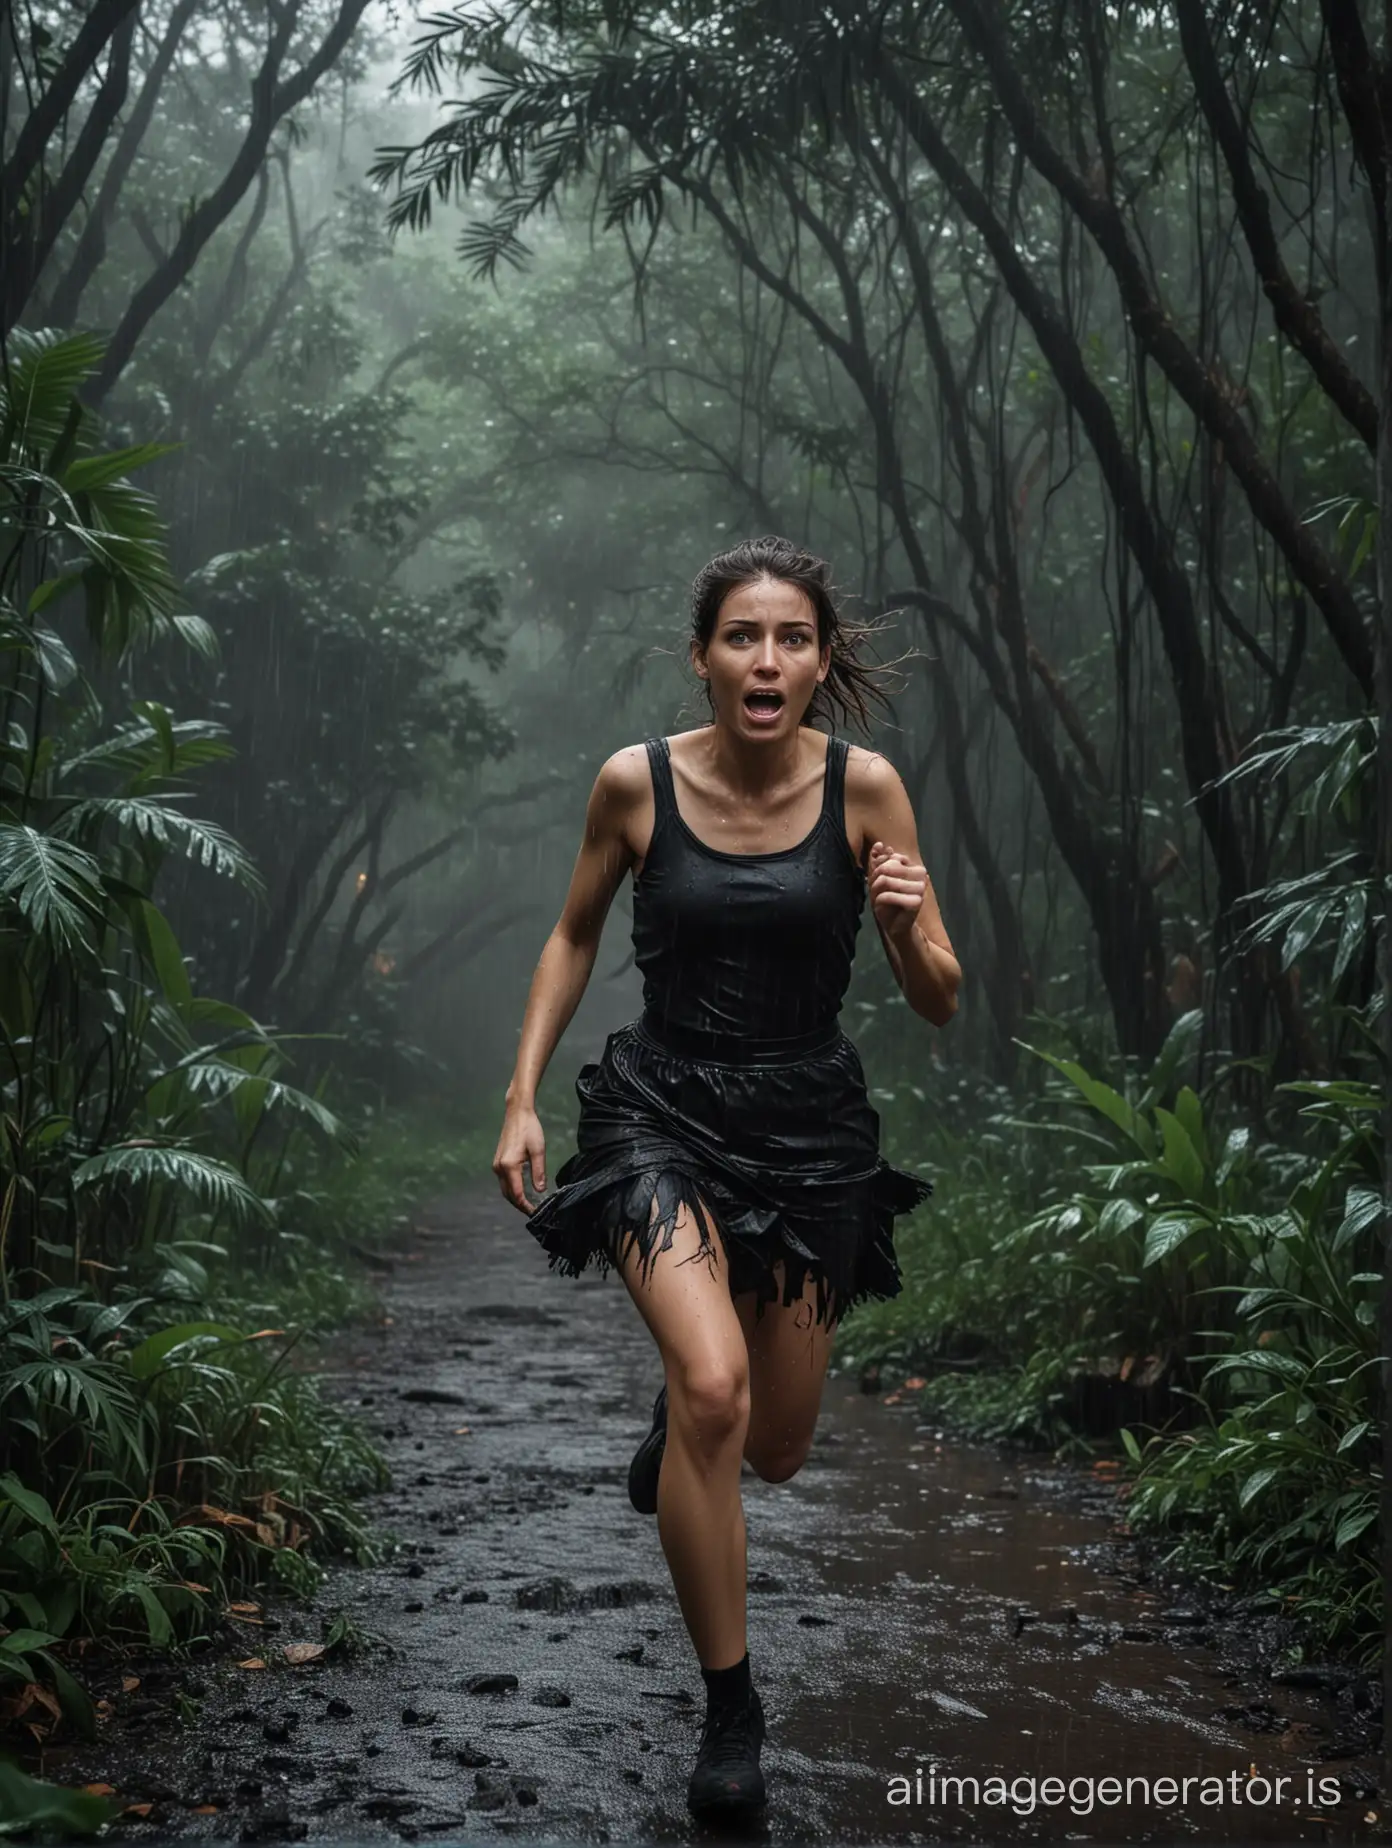 Scared-Girl-in-Torn-Outfit-Running-in-a-Rainy-Jungle-Winter-Night